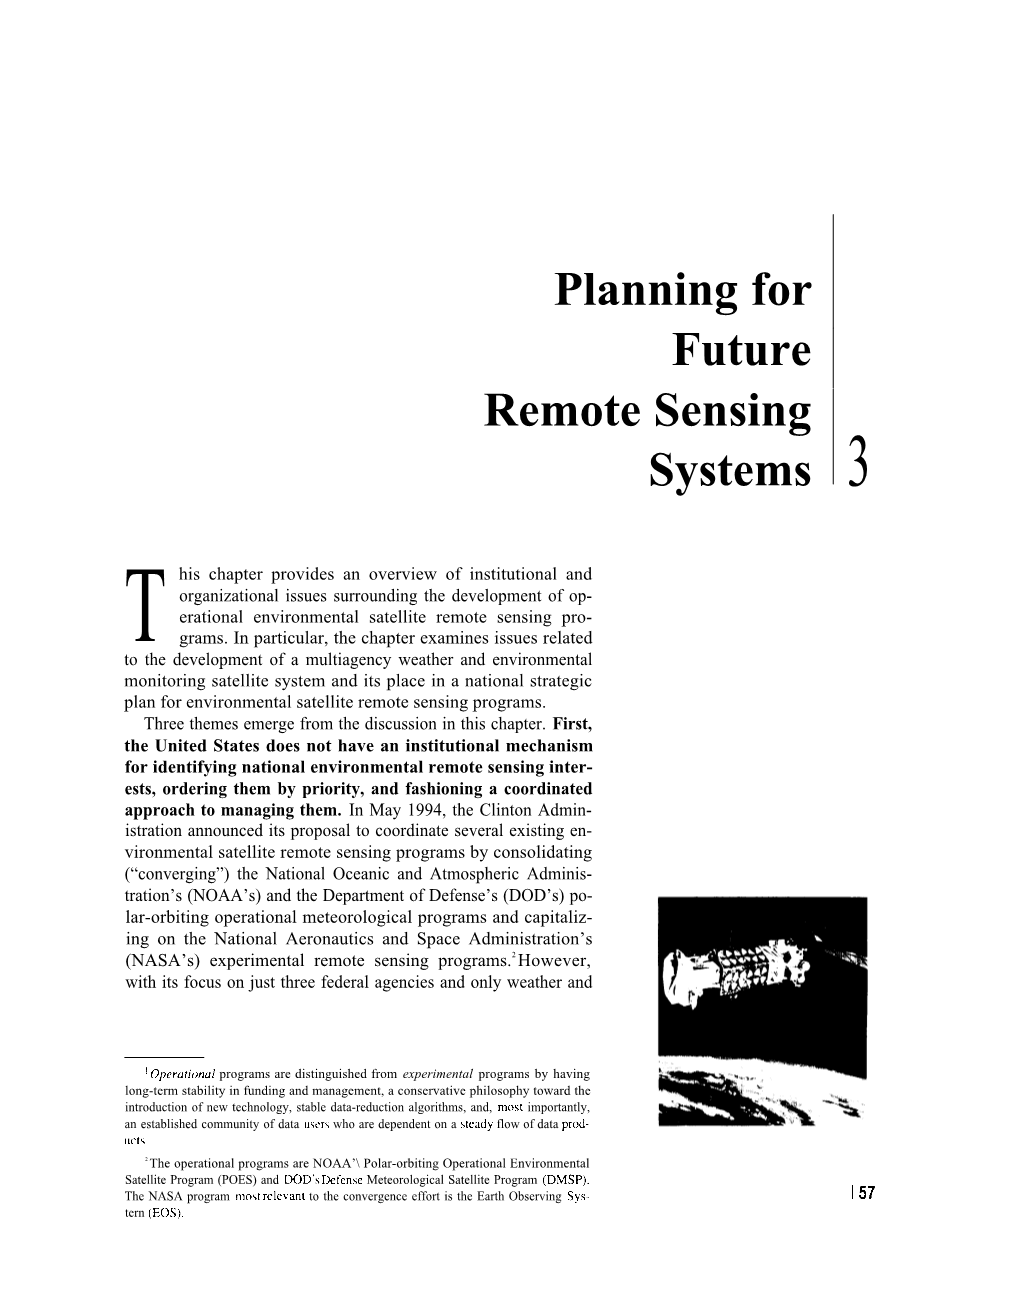 3: Planning for Future Remote Sensing Systems